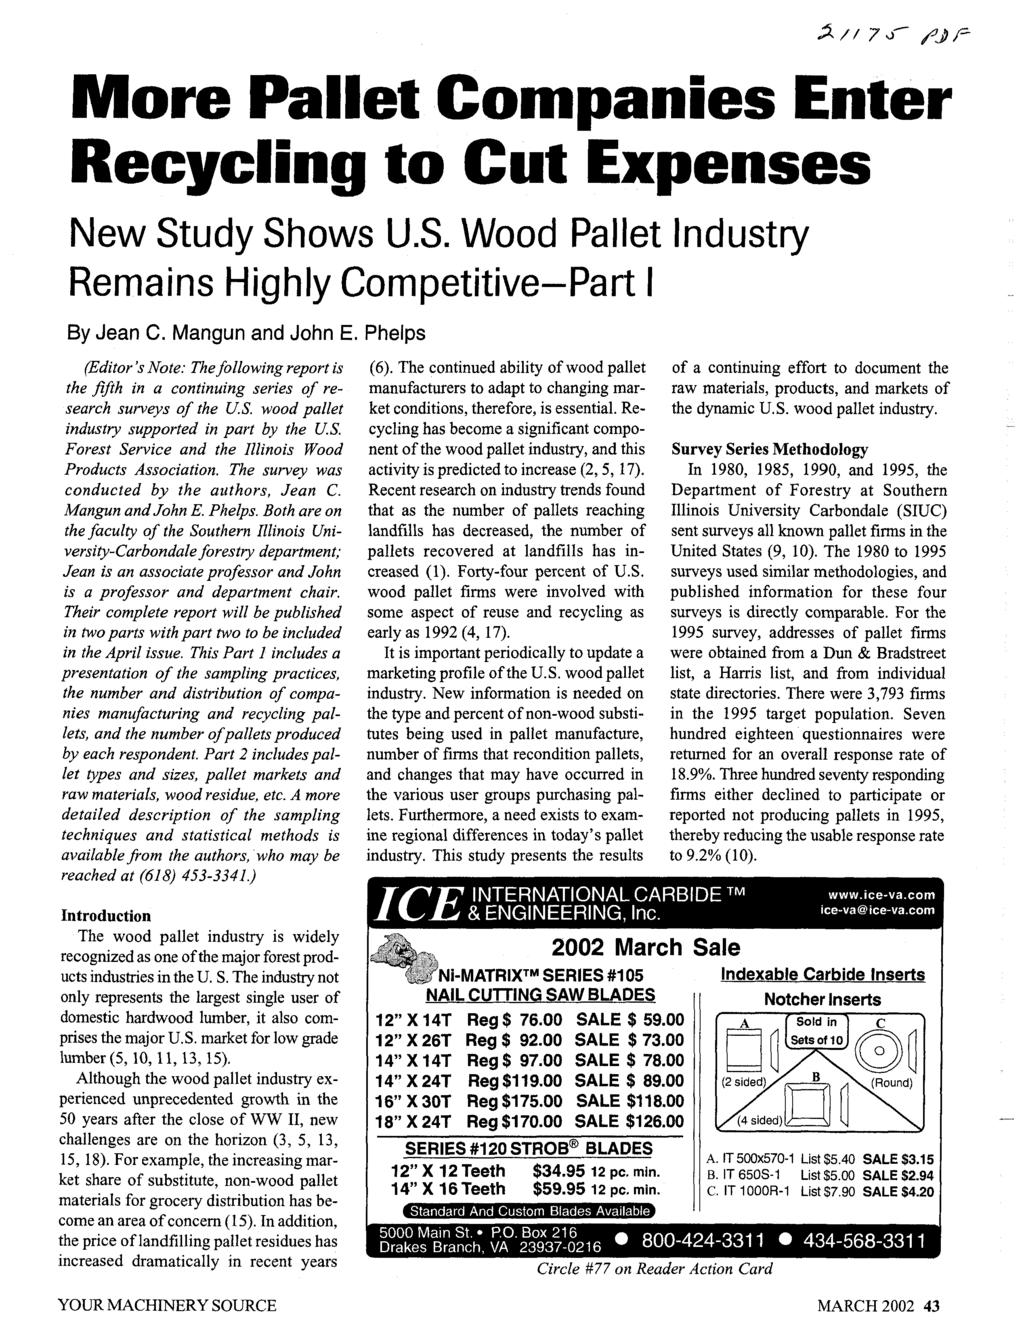 More Pallet Companies Enter Recycling to Cut Expenses New Study Shows US. Wood Pallet Industry Remains Highly Competitive-Part I By Jean C. Mangun and John E.